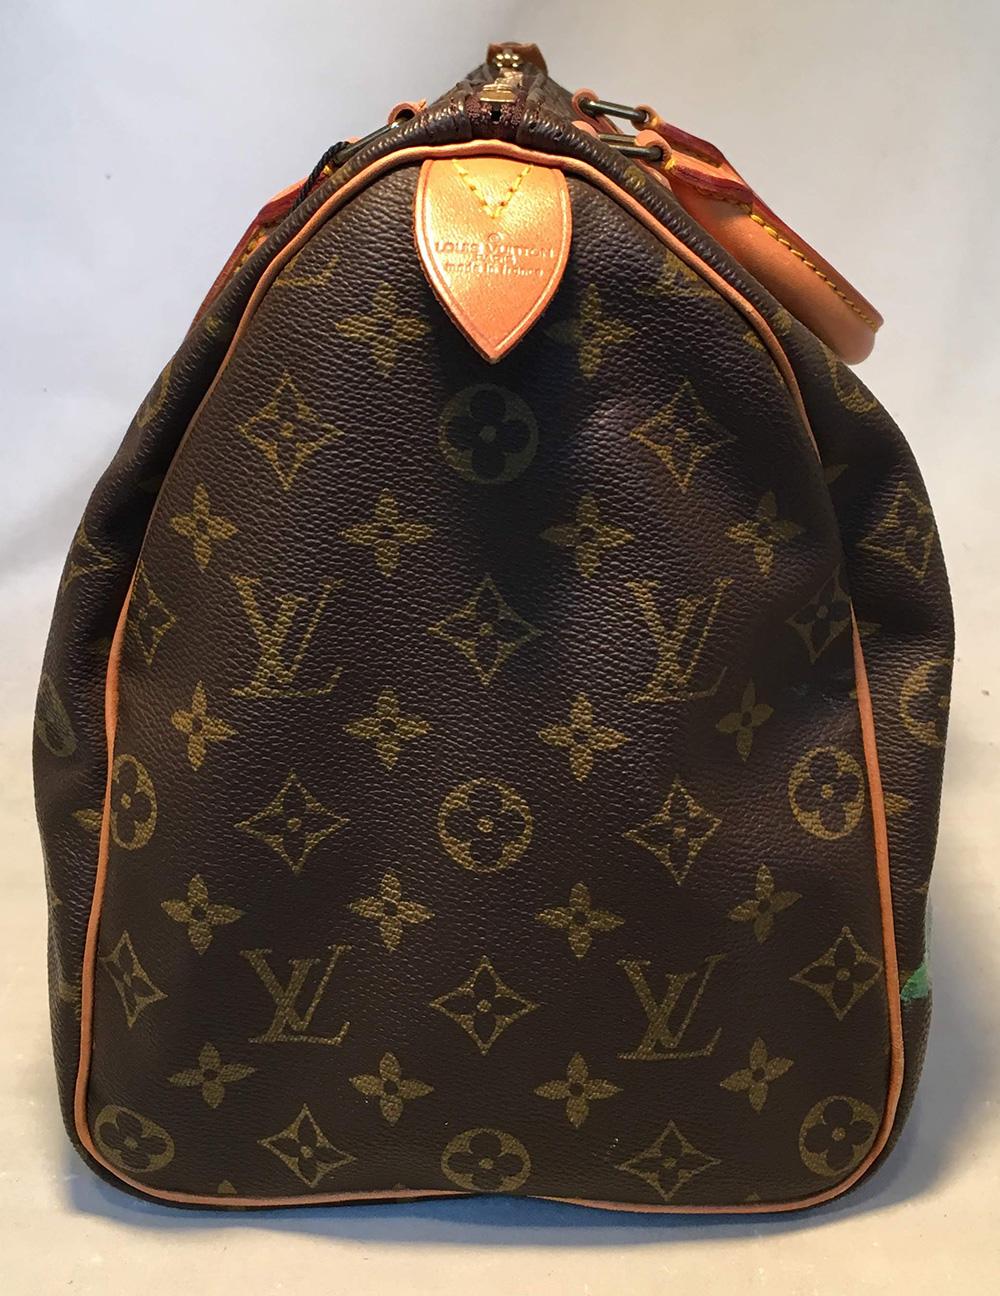 Louis Vuitton Vintage Monogram Hand Painted Yellow Sunflower Speedy 35 Handbag in excellent condition. Signature monogram canvas exterior trimmed with tan leather and brass hardware. Cluster of 5 hand painted yellow sunflowers along front side with